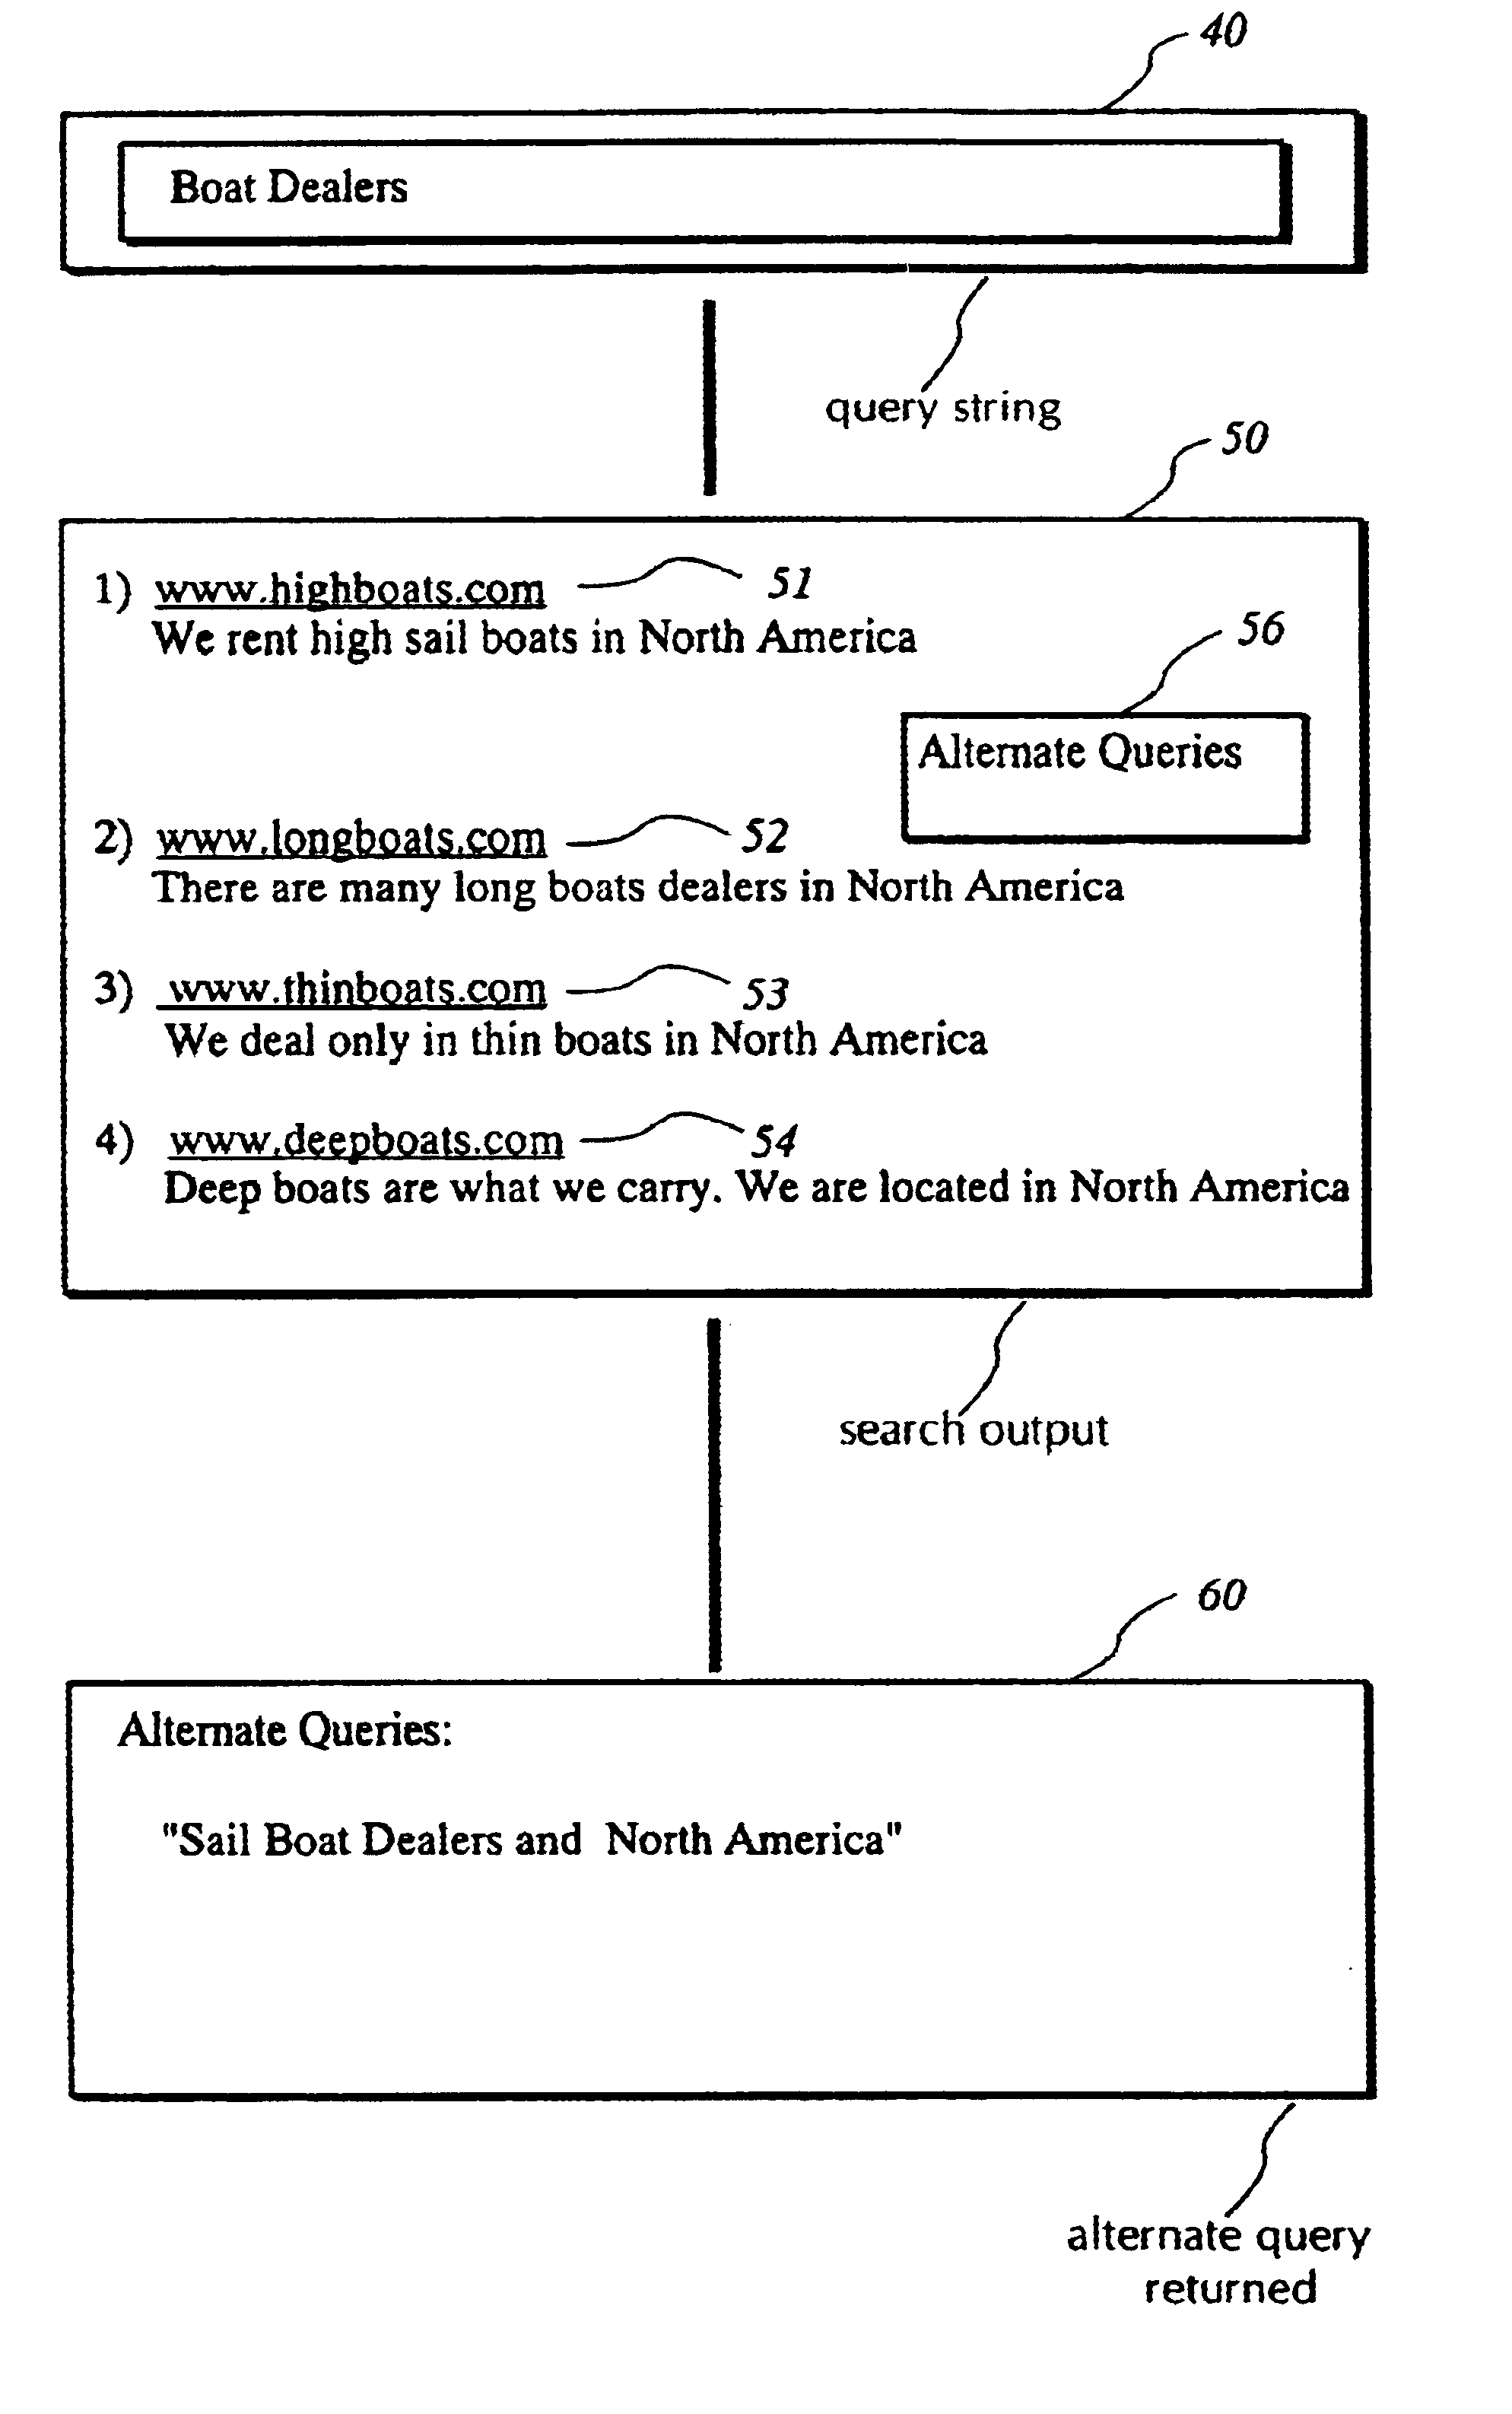 System and technique for suggesting alternate query expressions based on prior user selections and their query strings